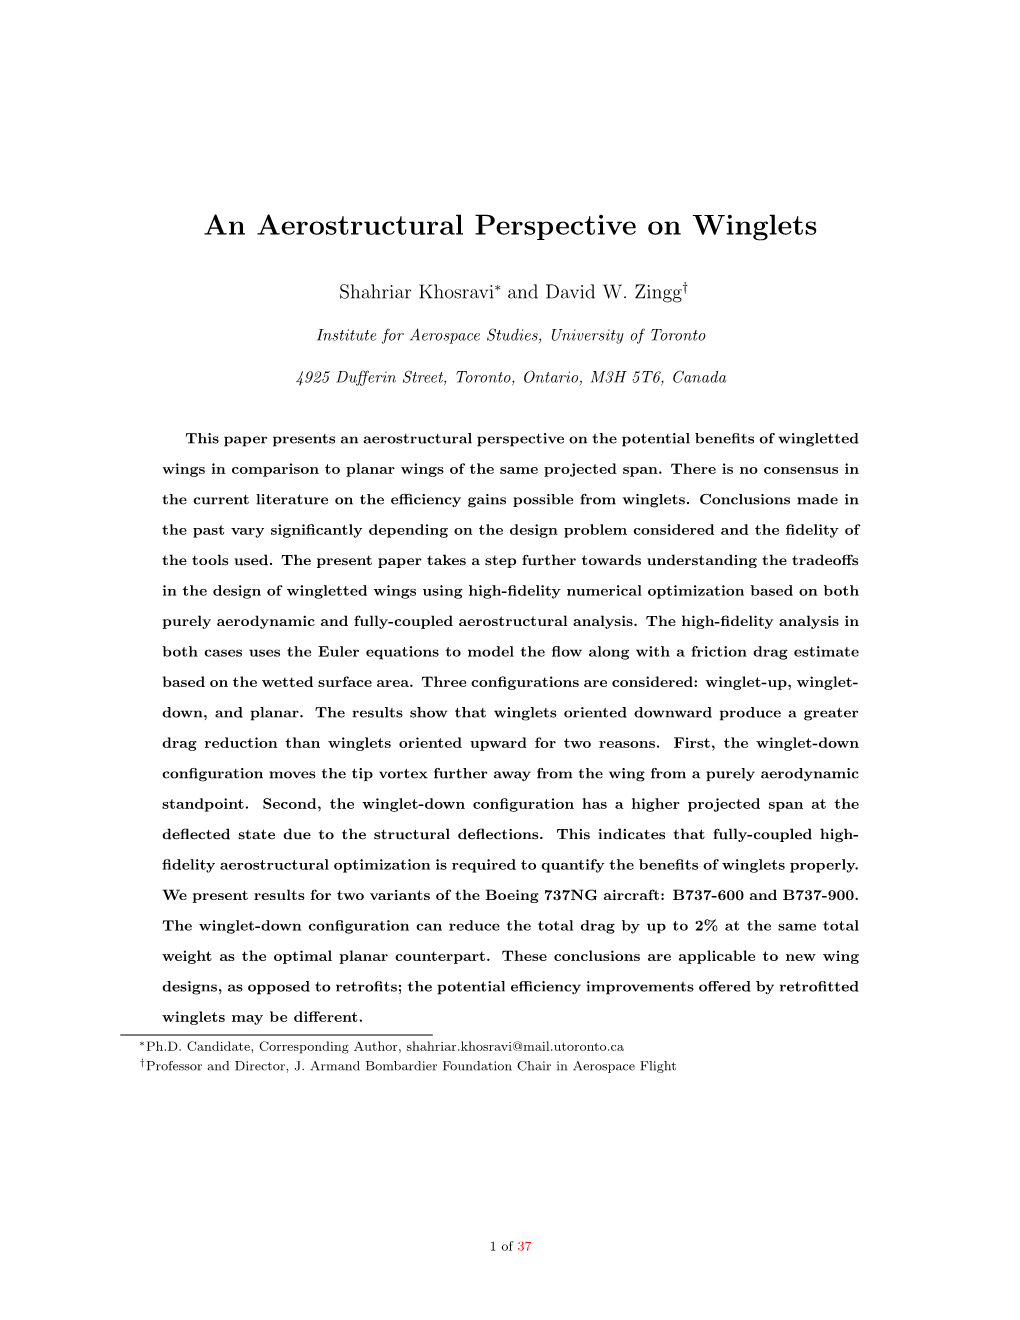 An Aerostructural Perspective on Winglets